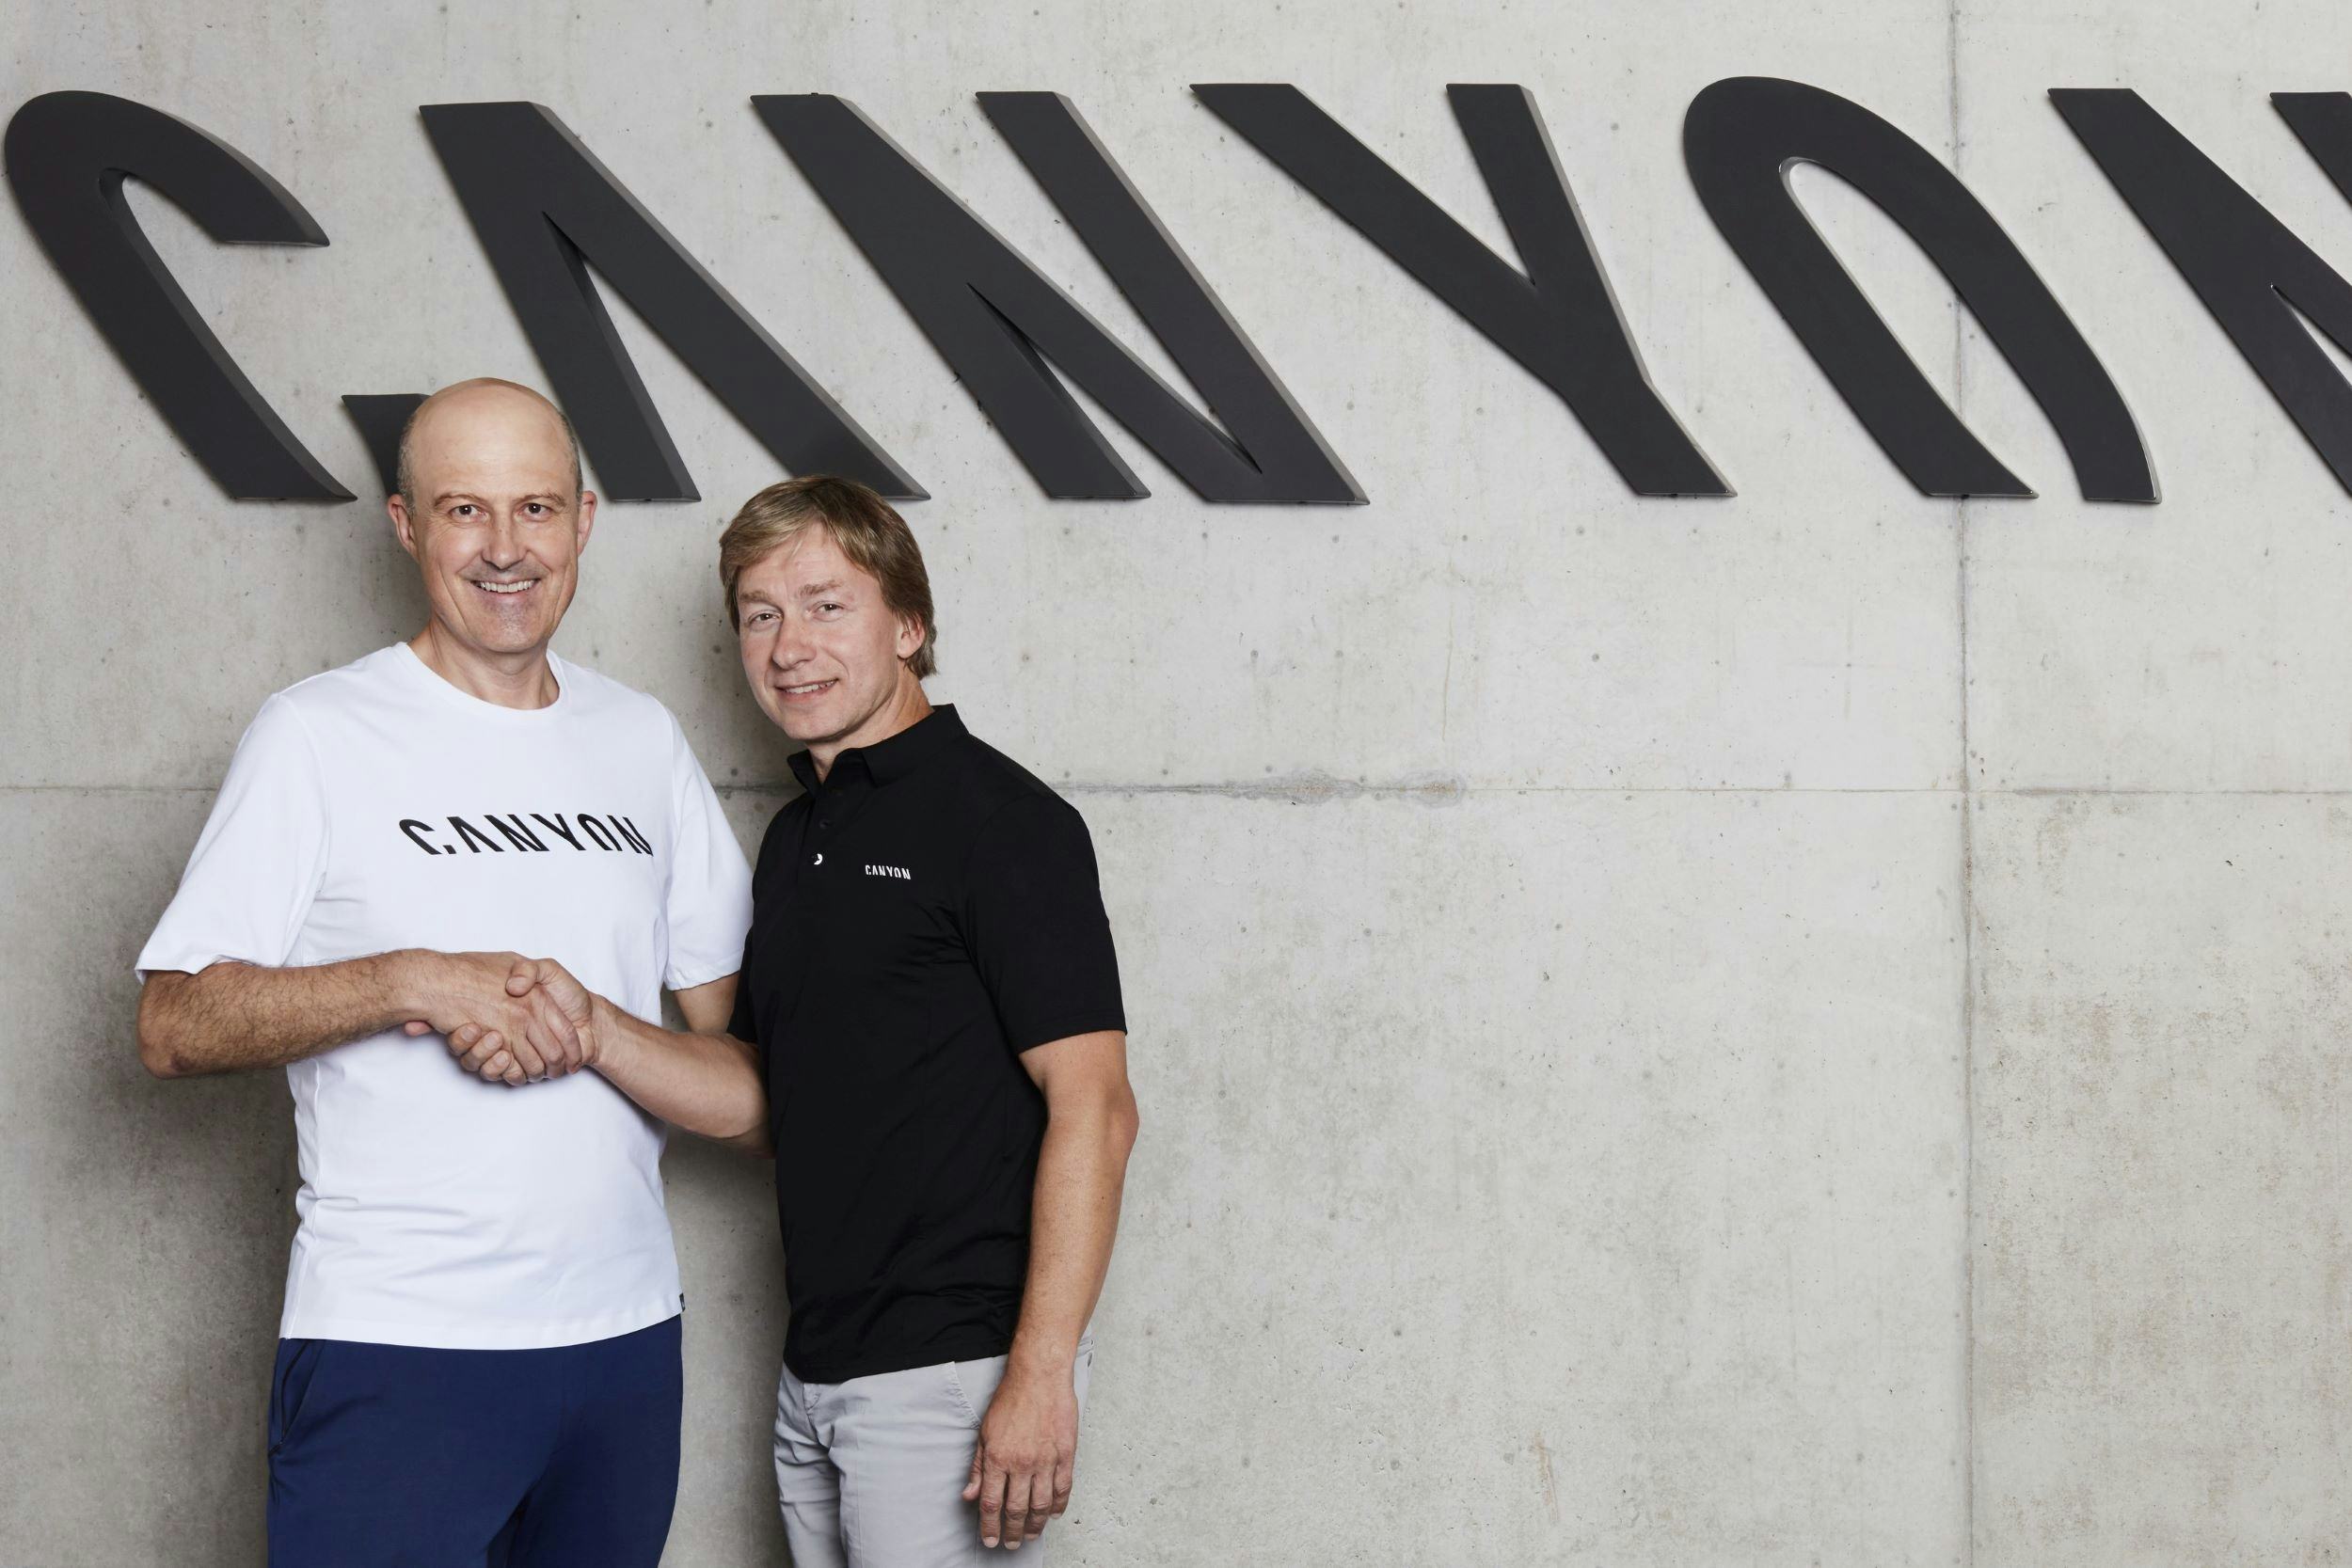 Canyon Bicycles founder Roman Arnold (left) hands over his CEO role to Armin Landgraf. - Photo Canyon Bicycles